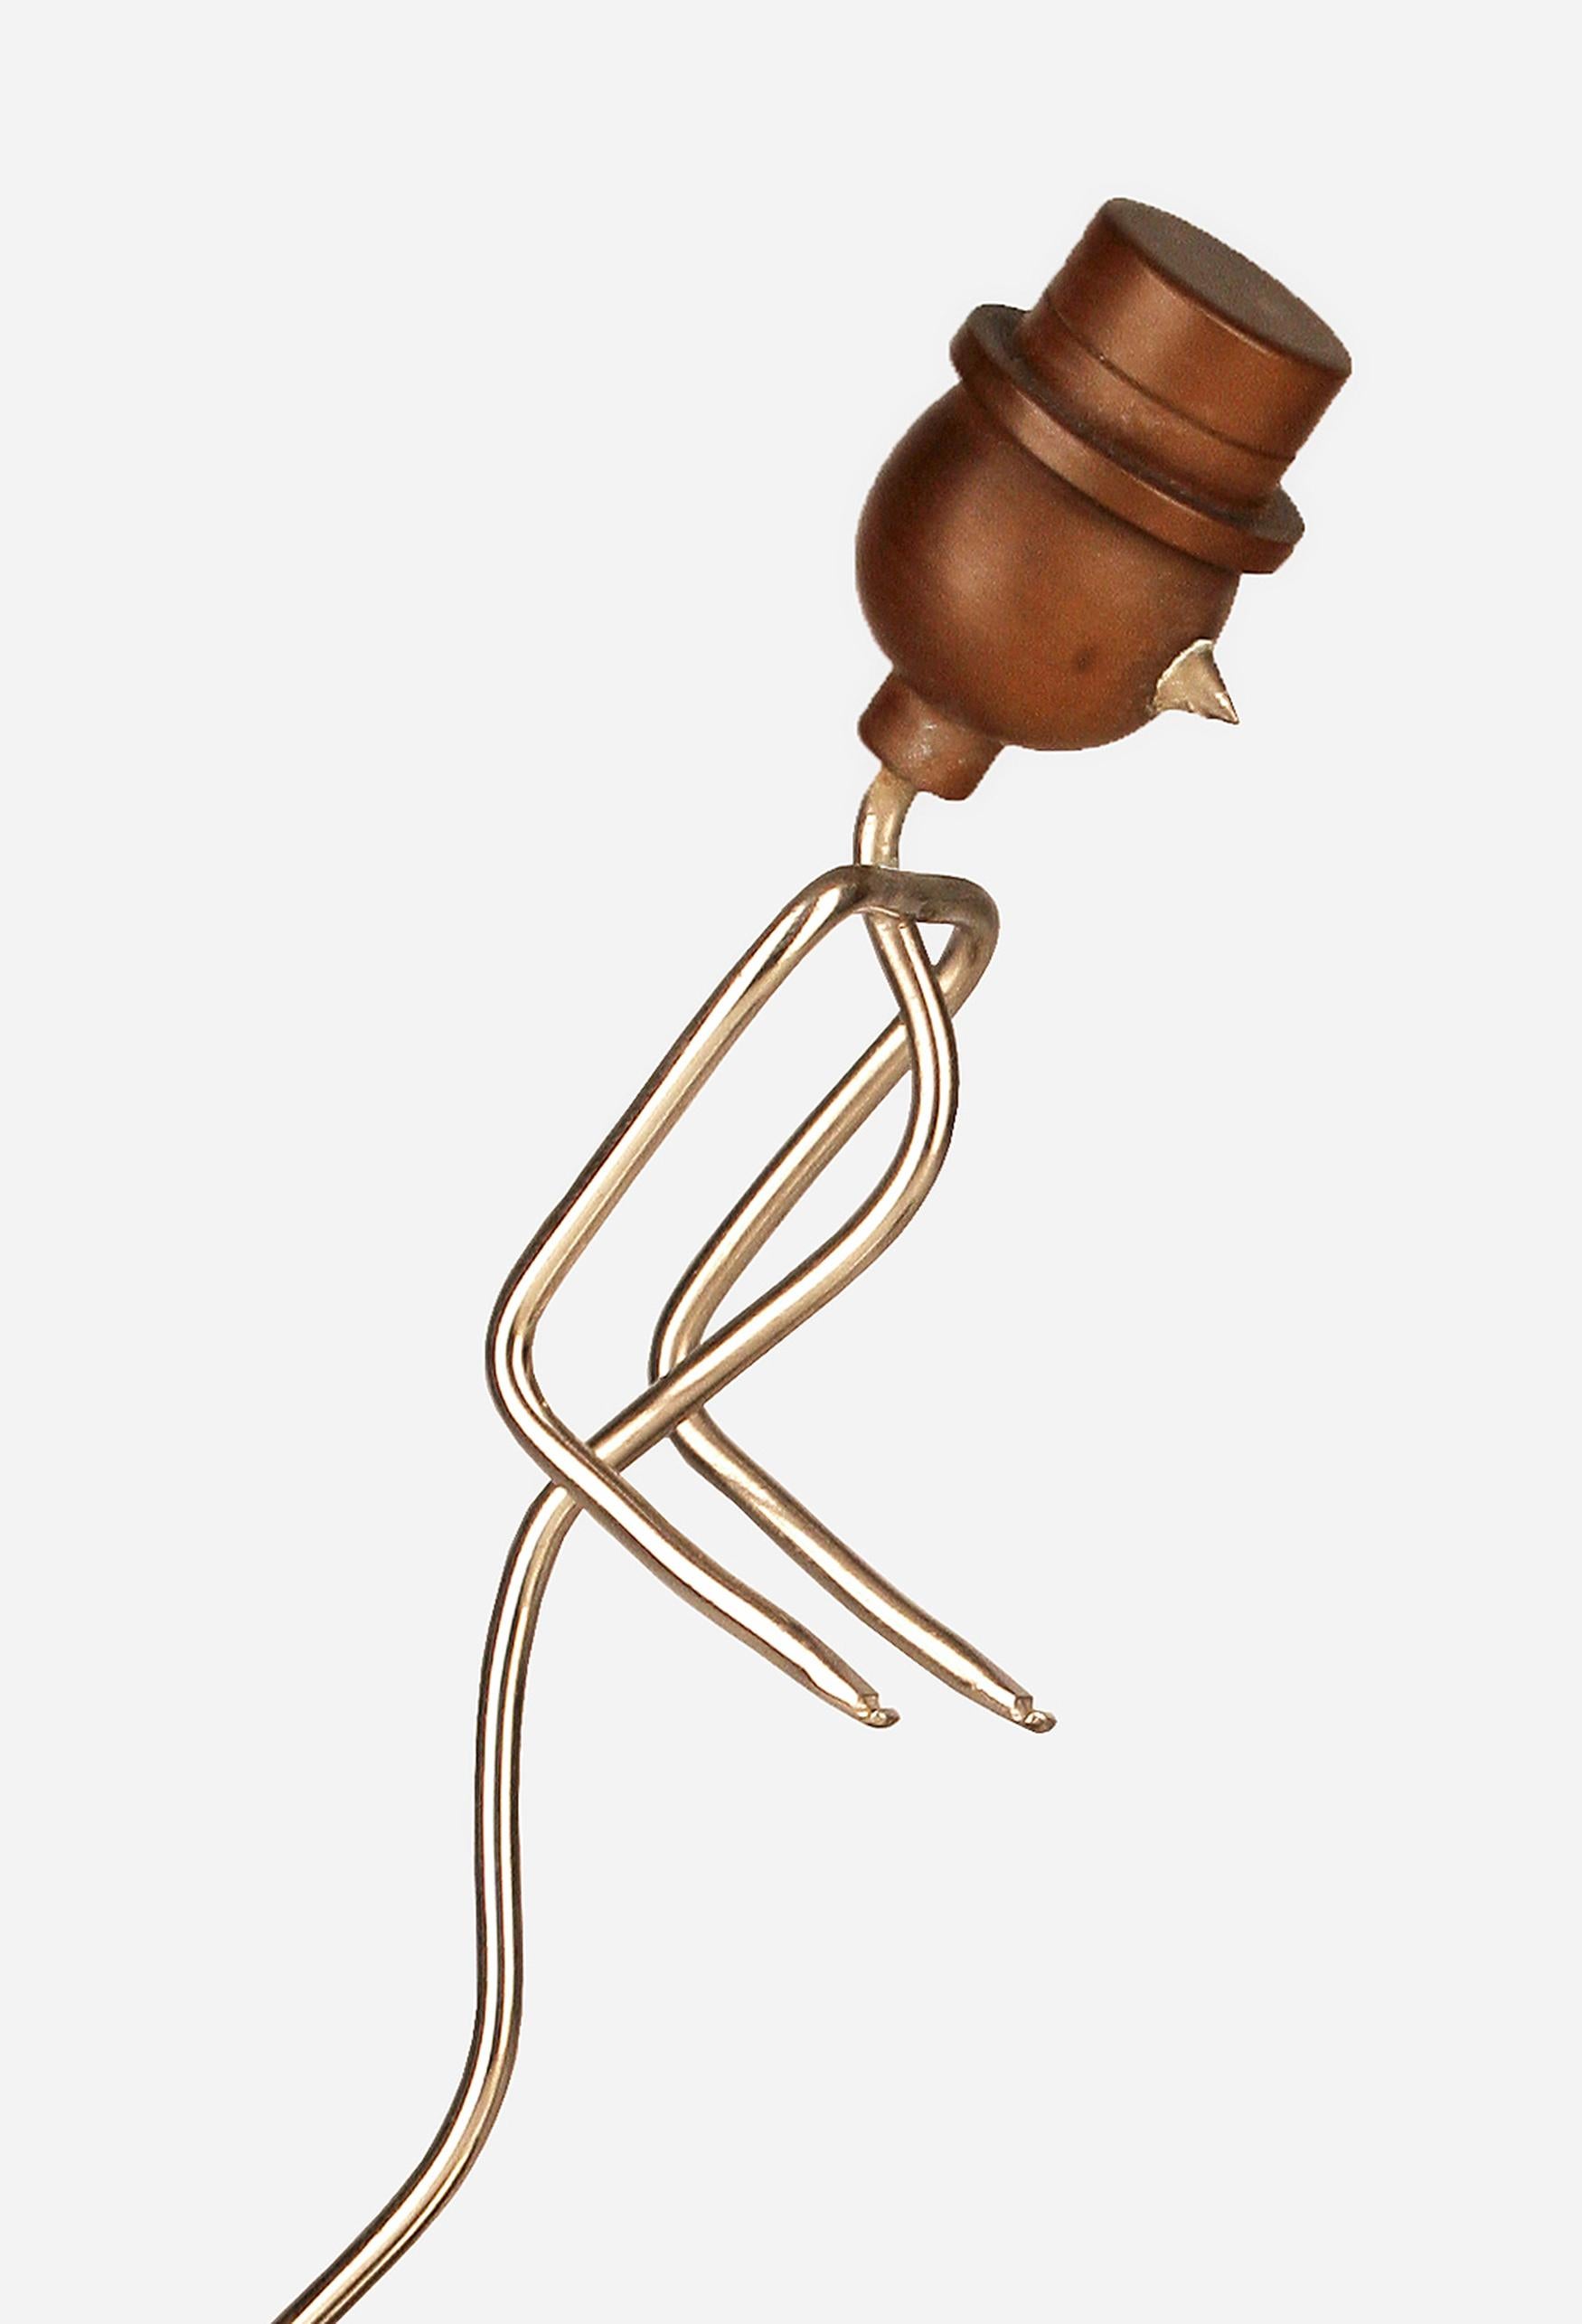 Art Déco American Metal Wire and Wood Bellboy/Bellhop/Stick Figure Match Holder In Good Condition For Sale In North Miami, FL